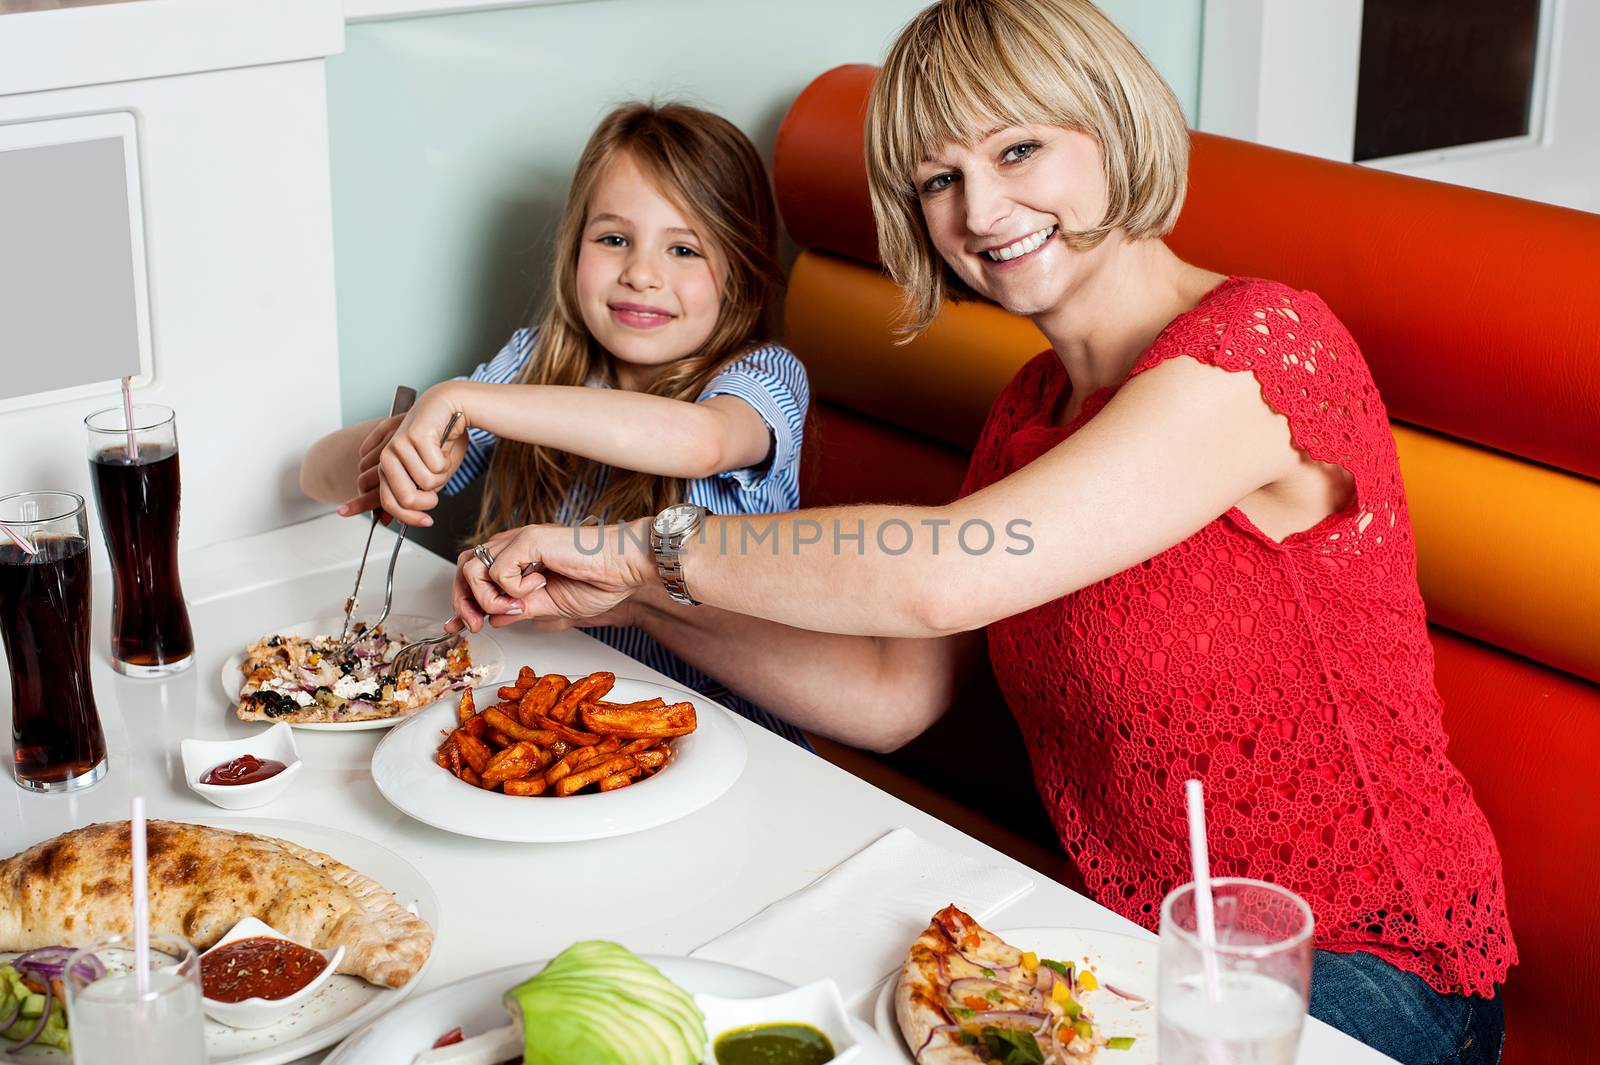 Daughter enjoying meal with her mother